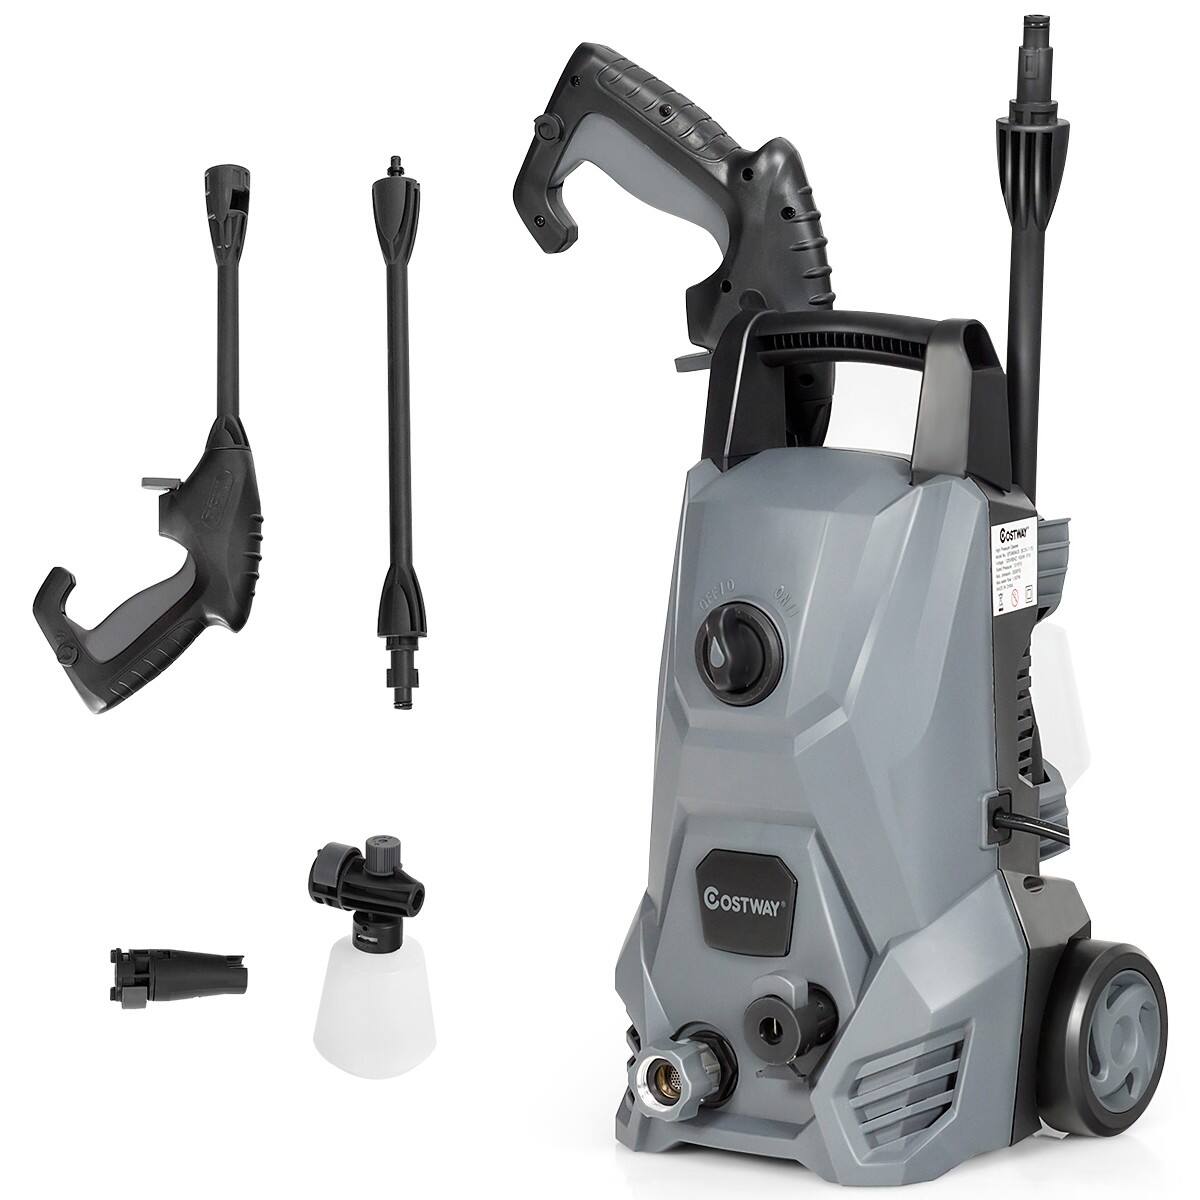 Costway 2030 PSI Electric High Power Portable Pressure Washer with Nozzle for $74.95 + FS